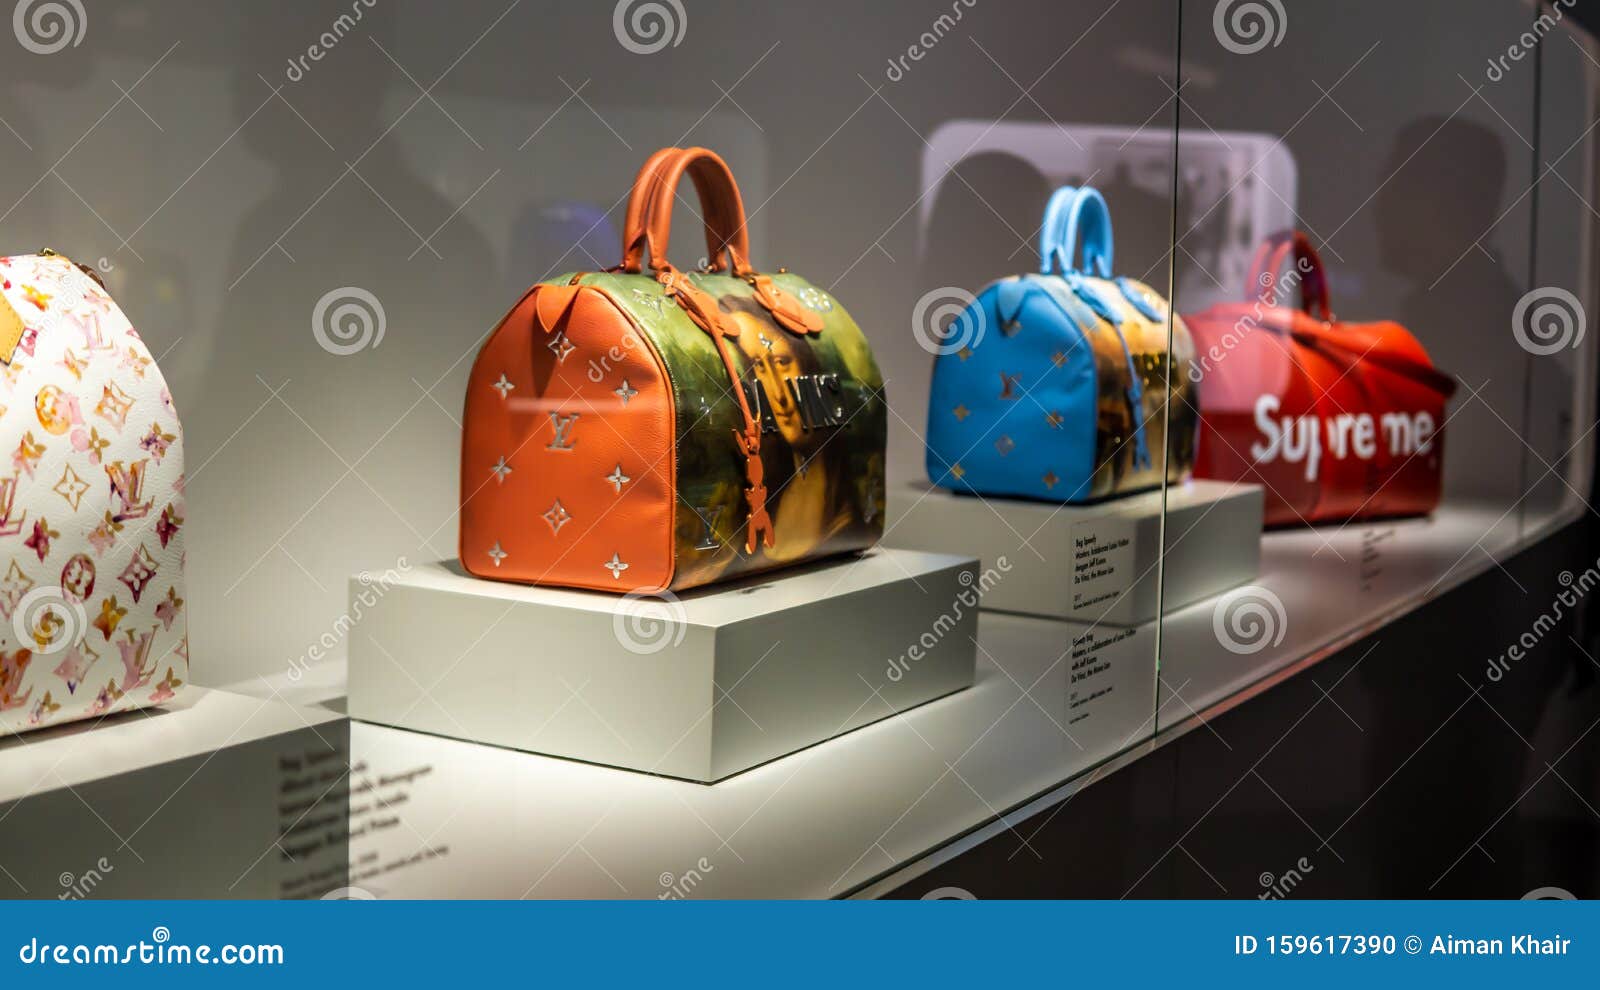 Louis Vuitton Keepall Bag Collections Showcase At The Time Capsule Exhibition By Louis Vuitton ...